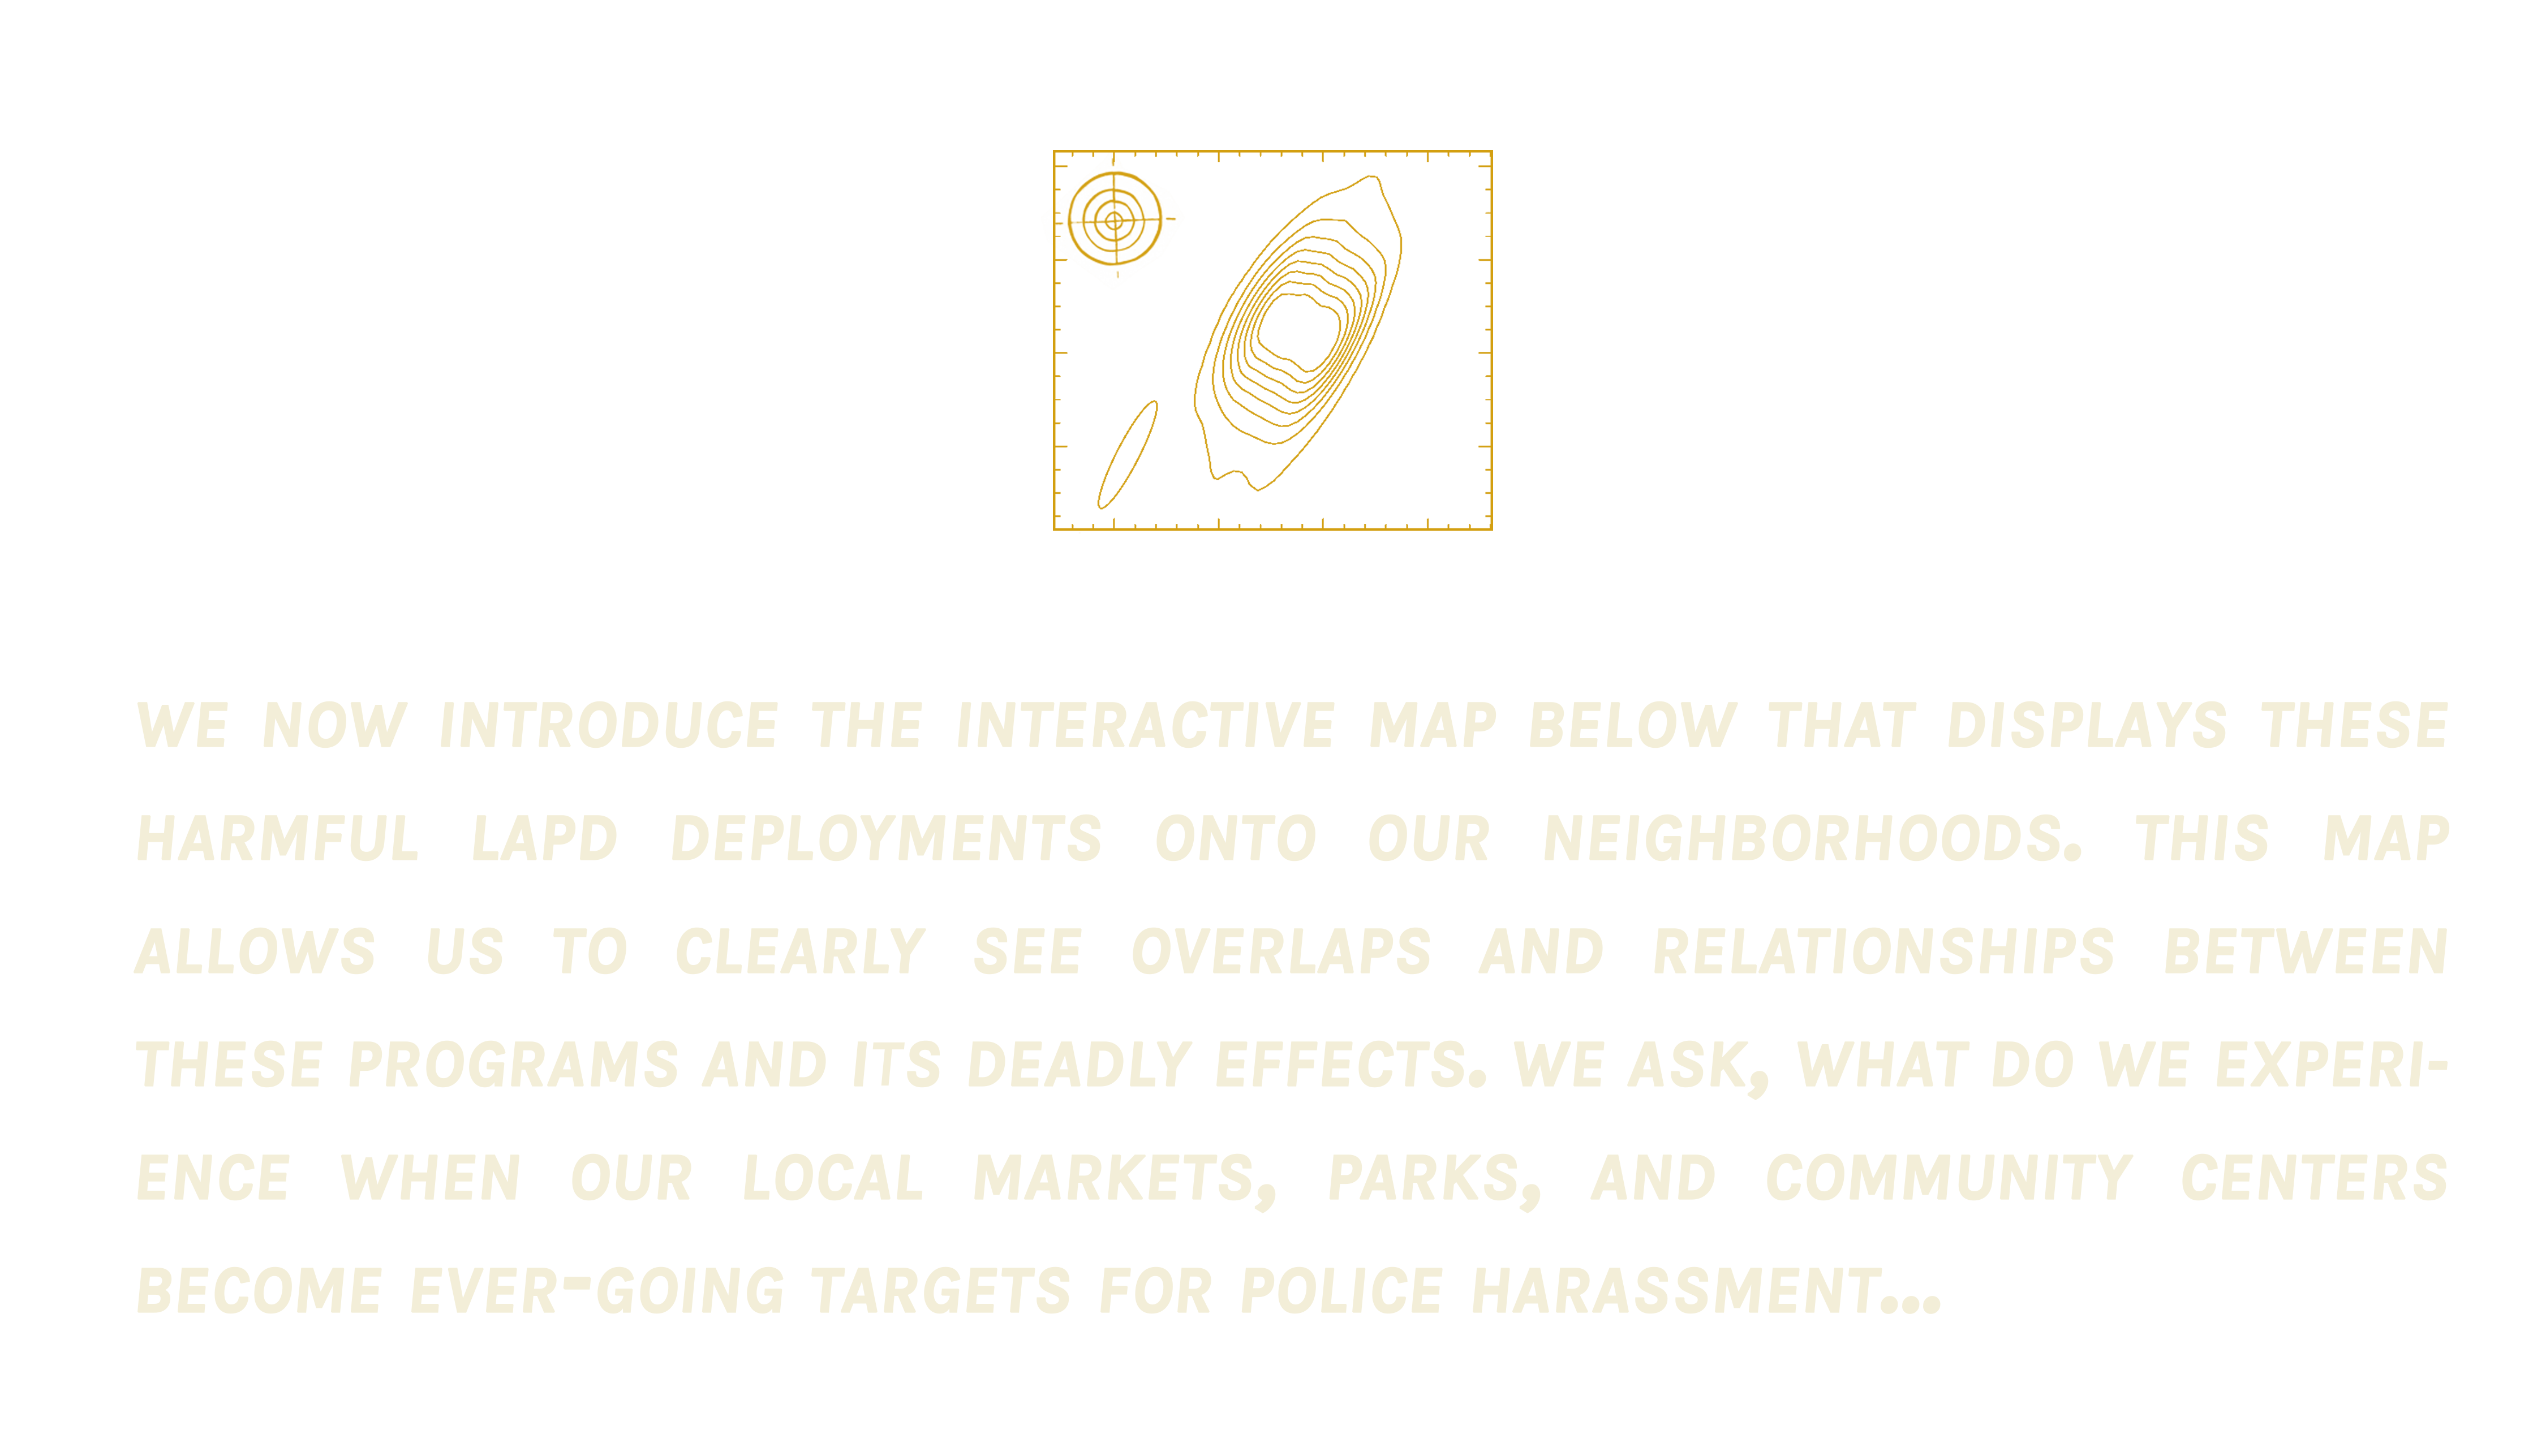 Automated Displacement: Uncovering LAPDs ‘predictive’ policing programs that control, displace and criminalize people and places.